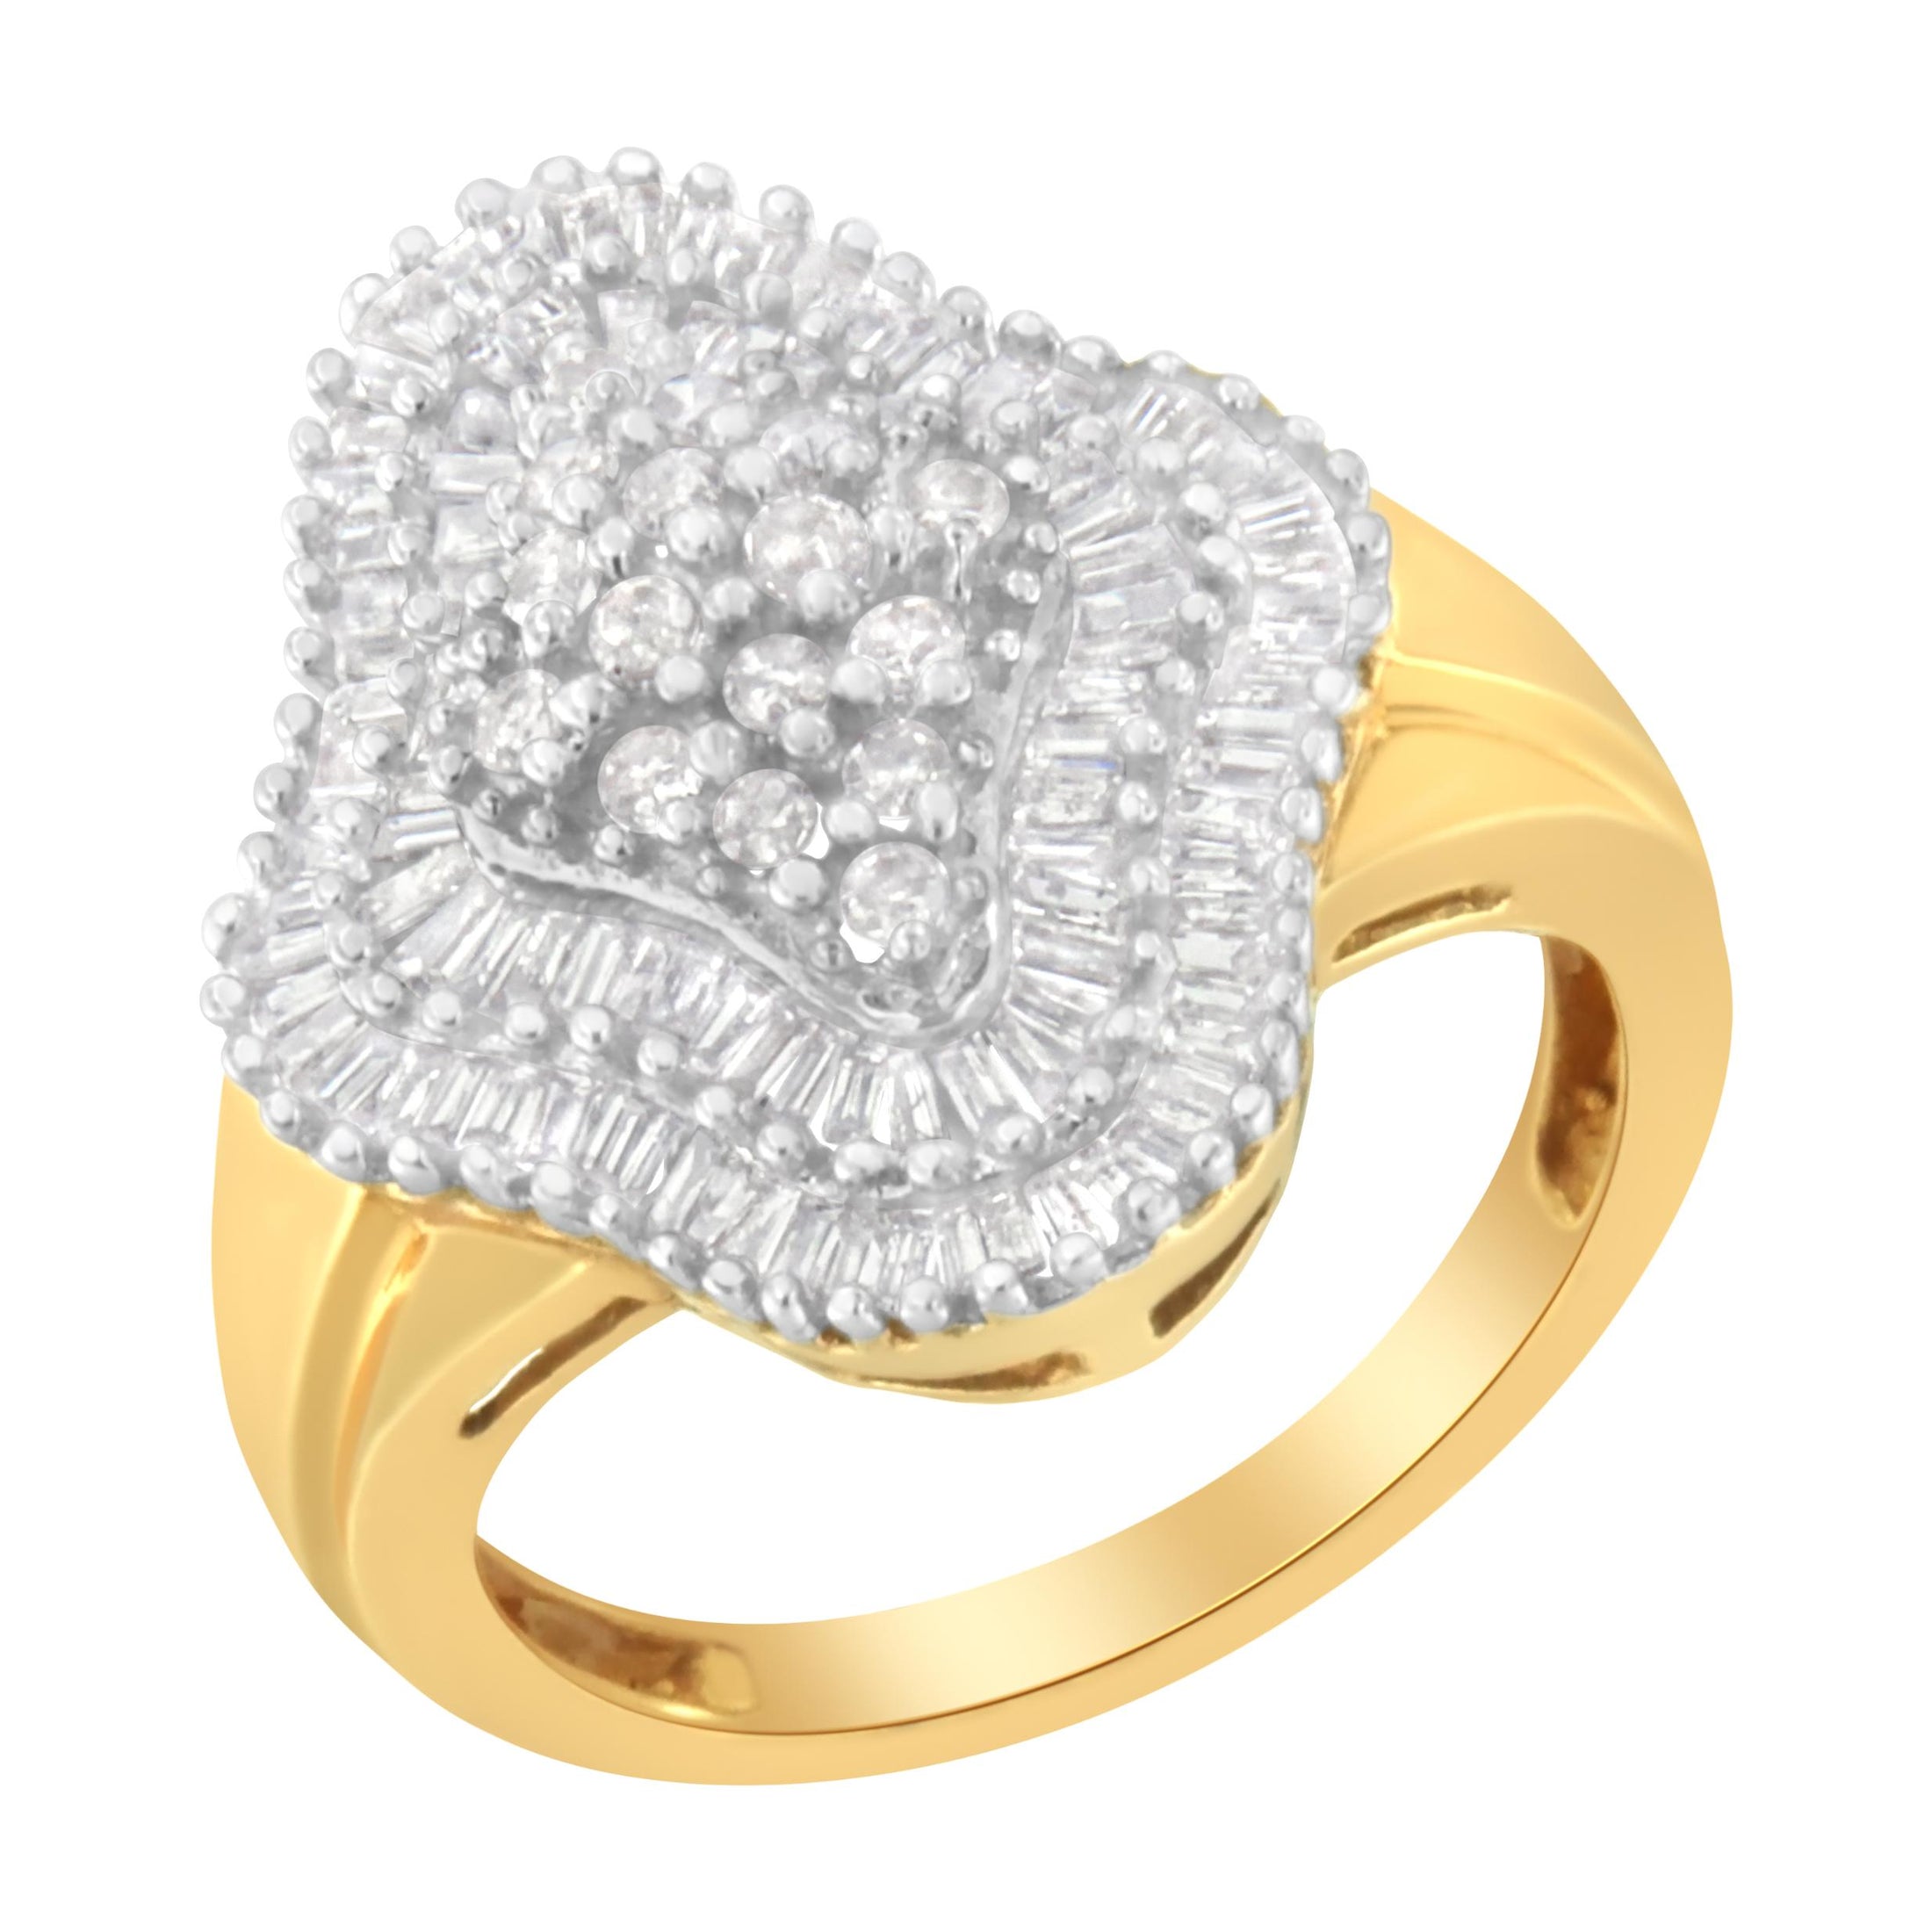 10KT Yellow Gold 1 cttw Diamond Cluster Ring - Size 6